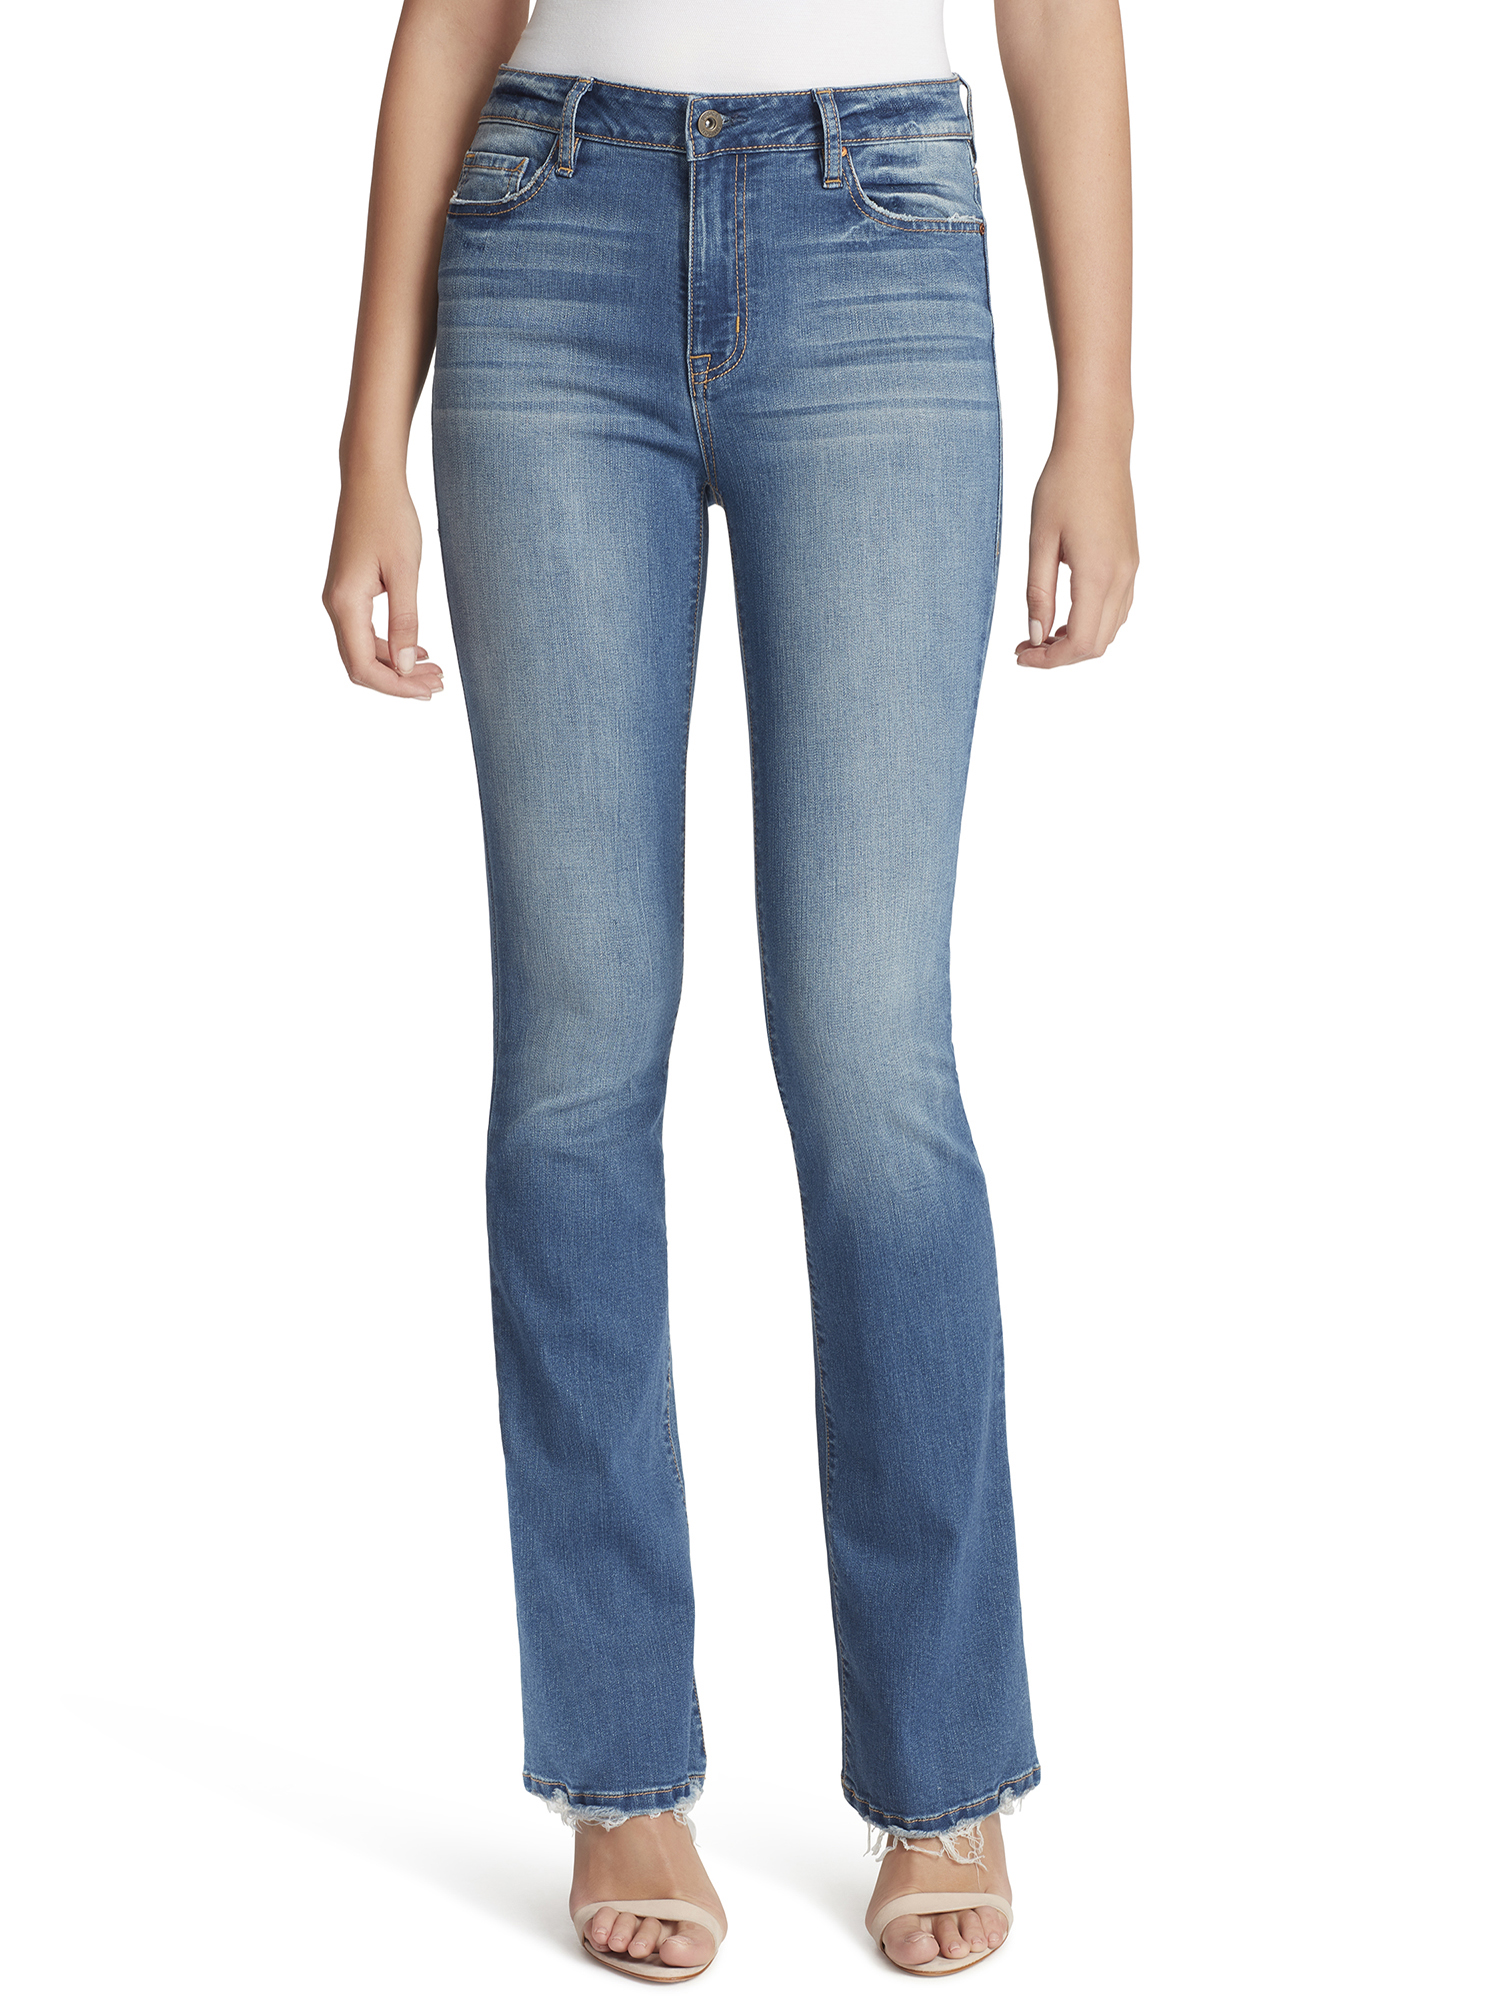 Jessica Simpson Women's Truly Yours Bootcut Jean - image 1 of 3